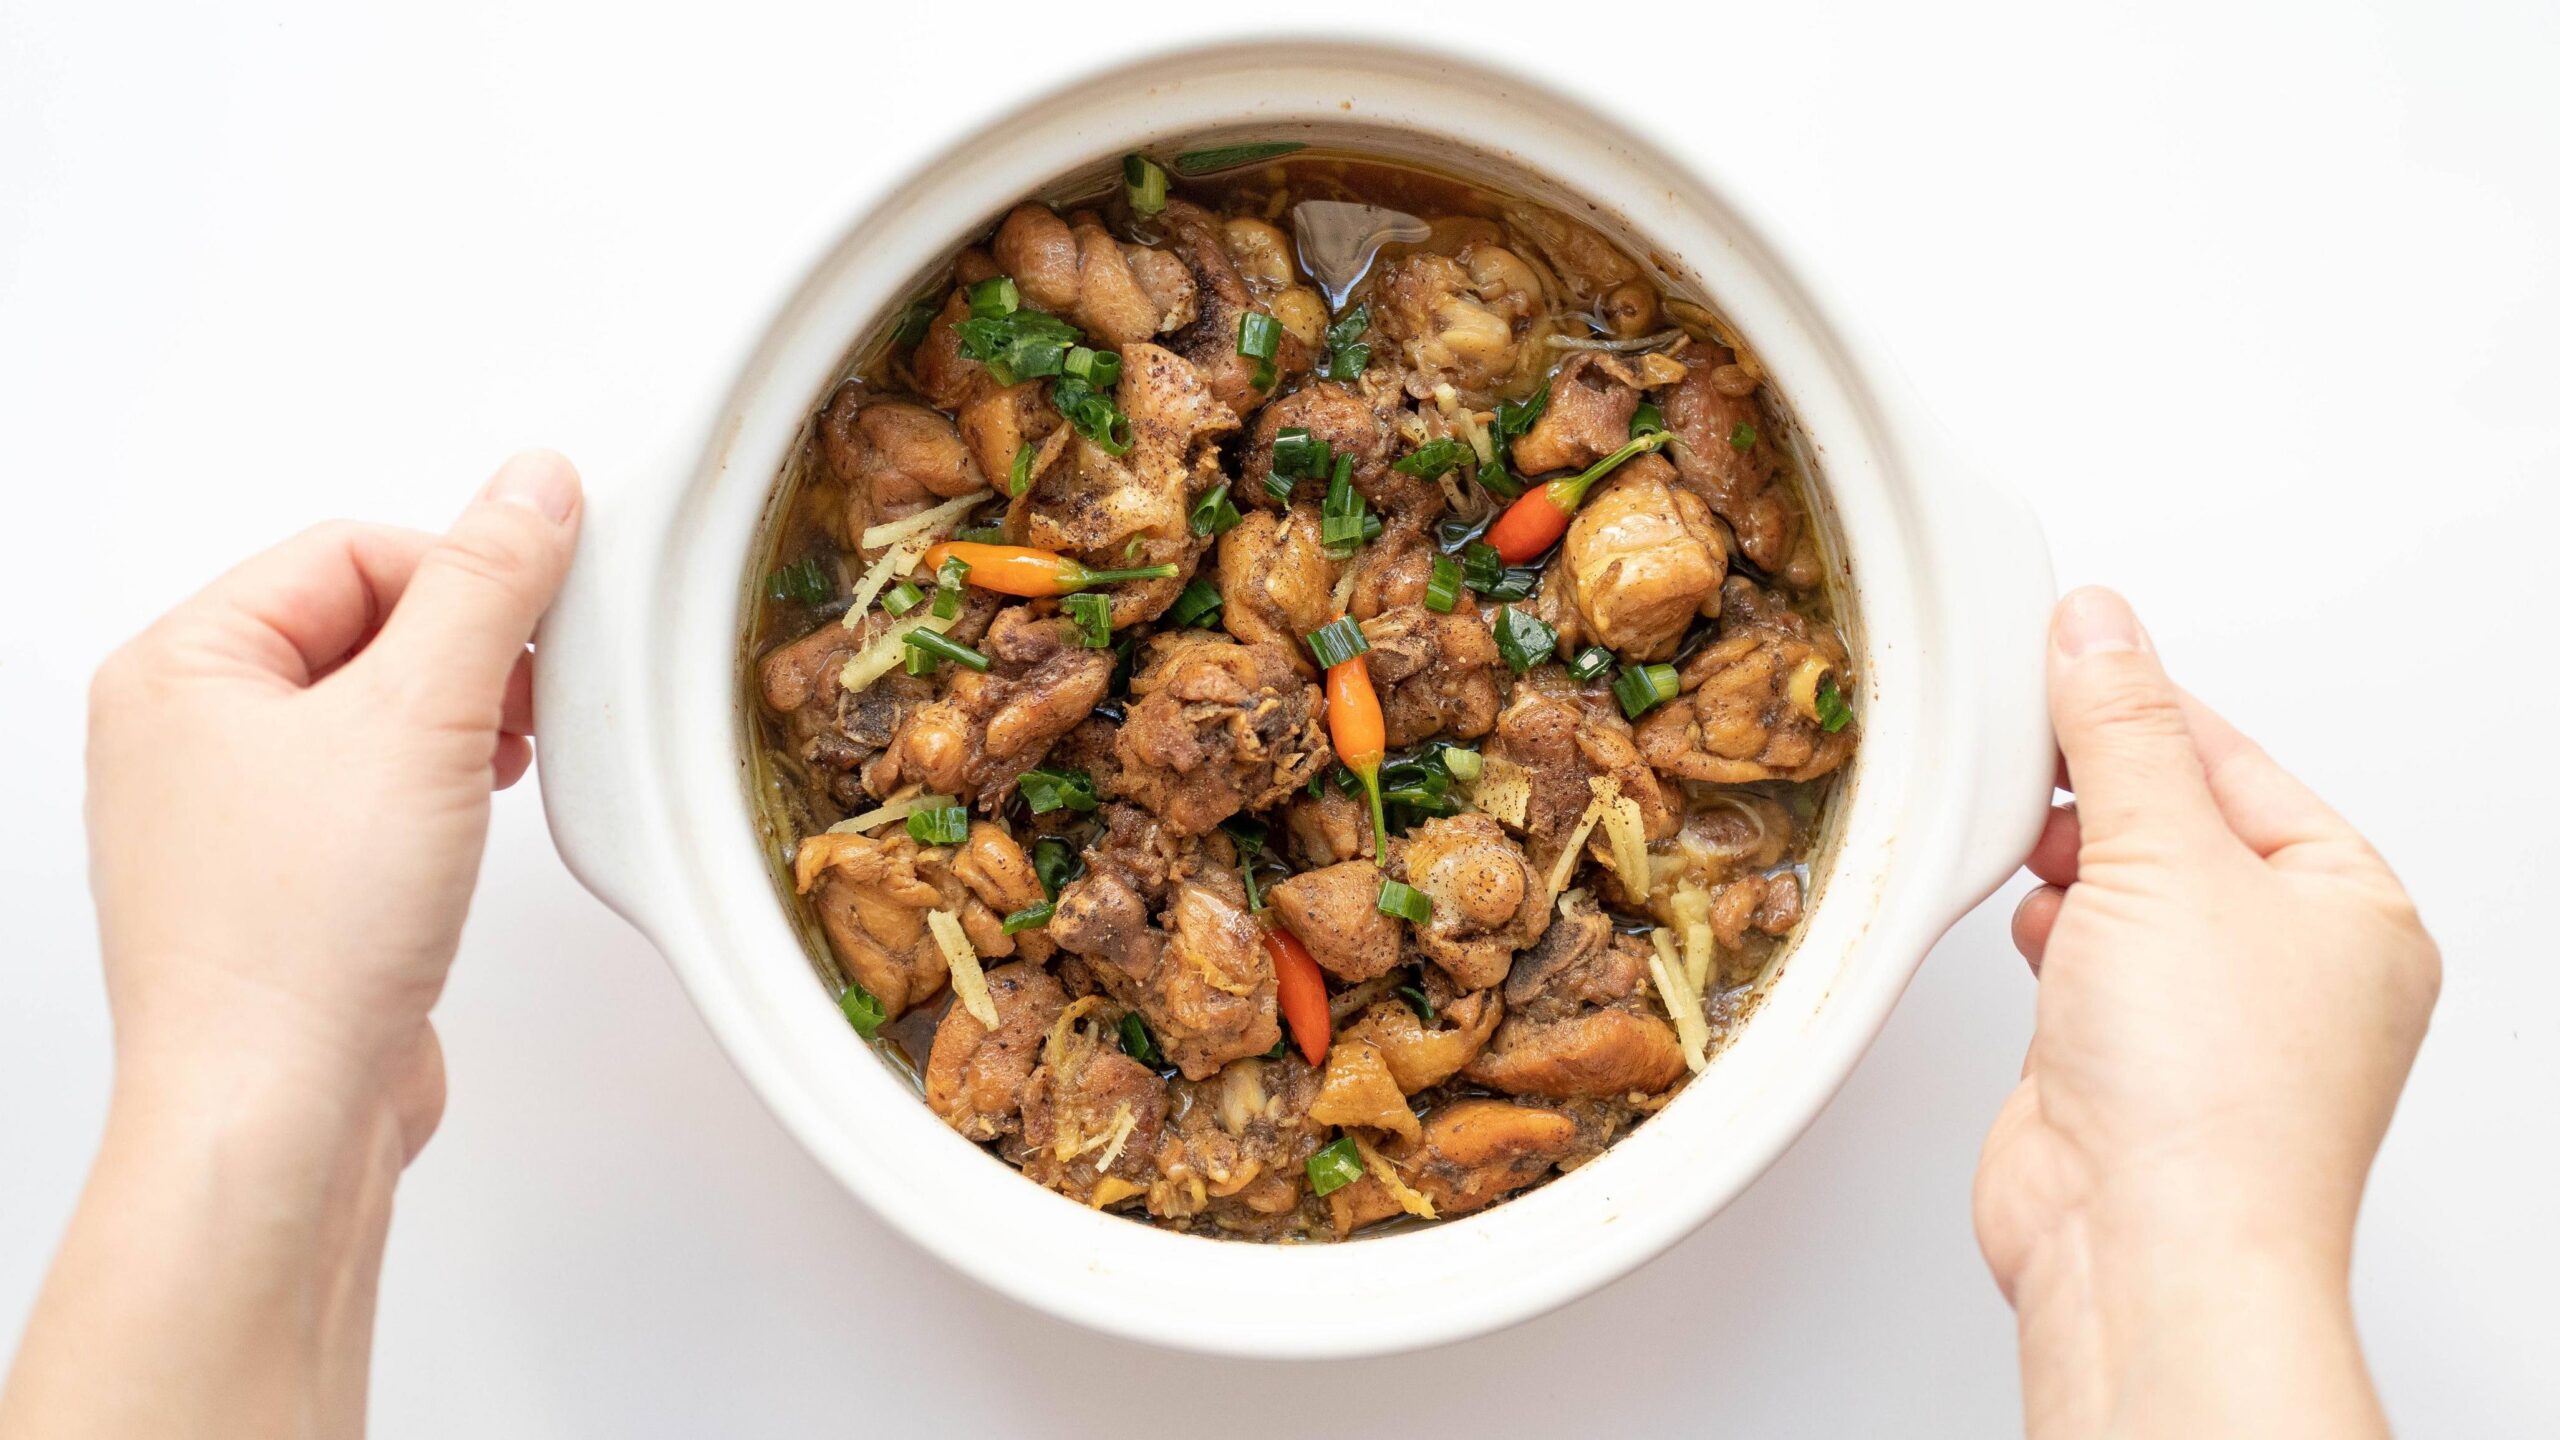  Ginger is the star of this Ga Kho dish!